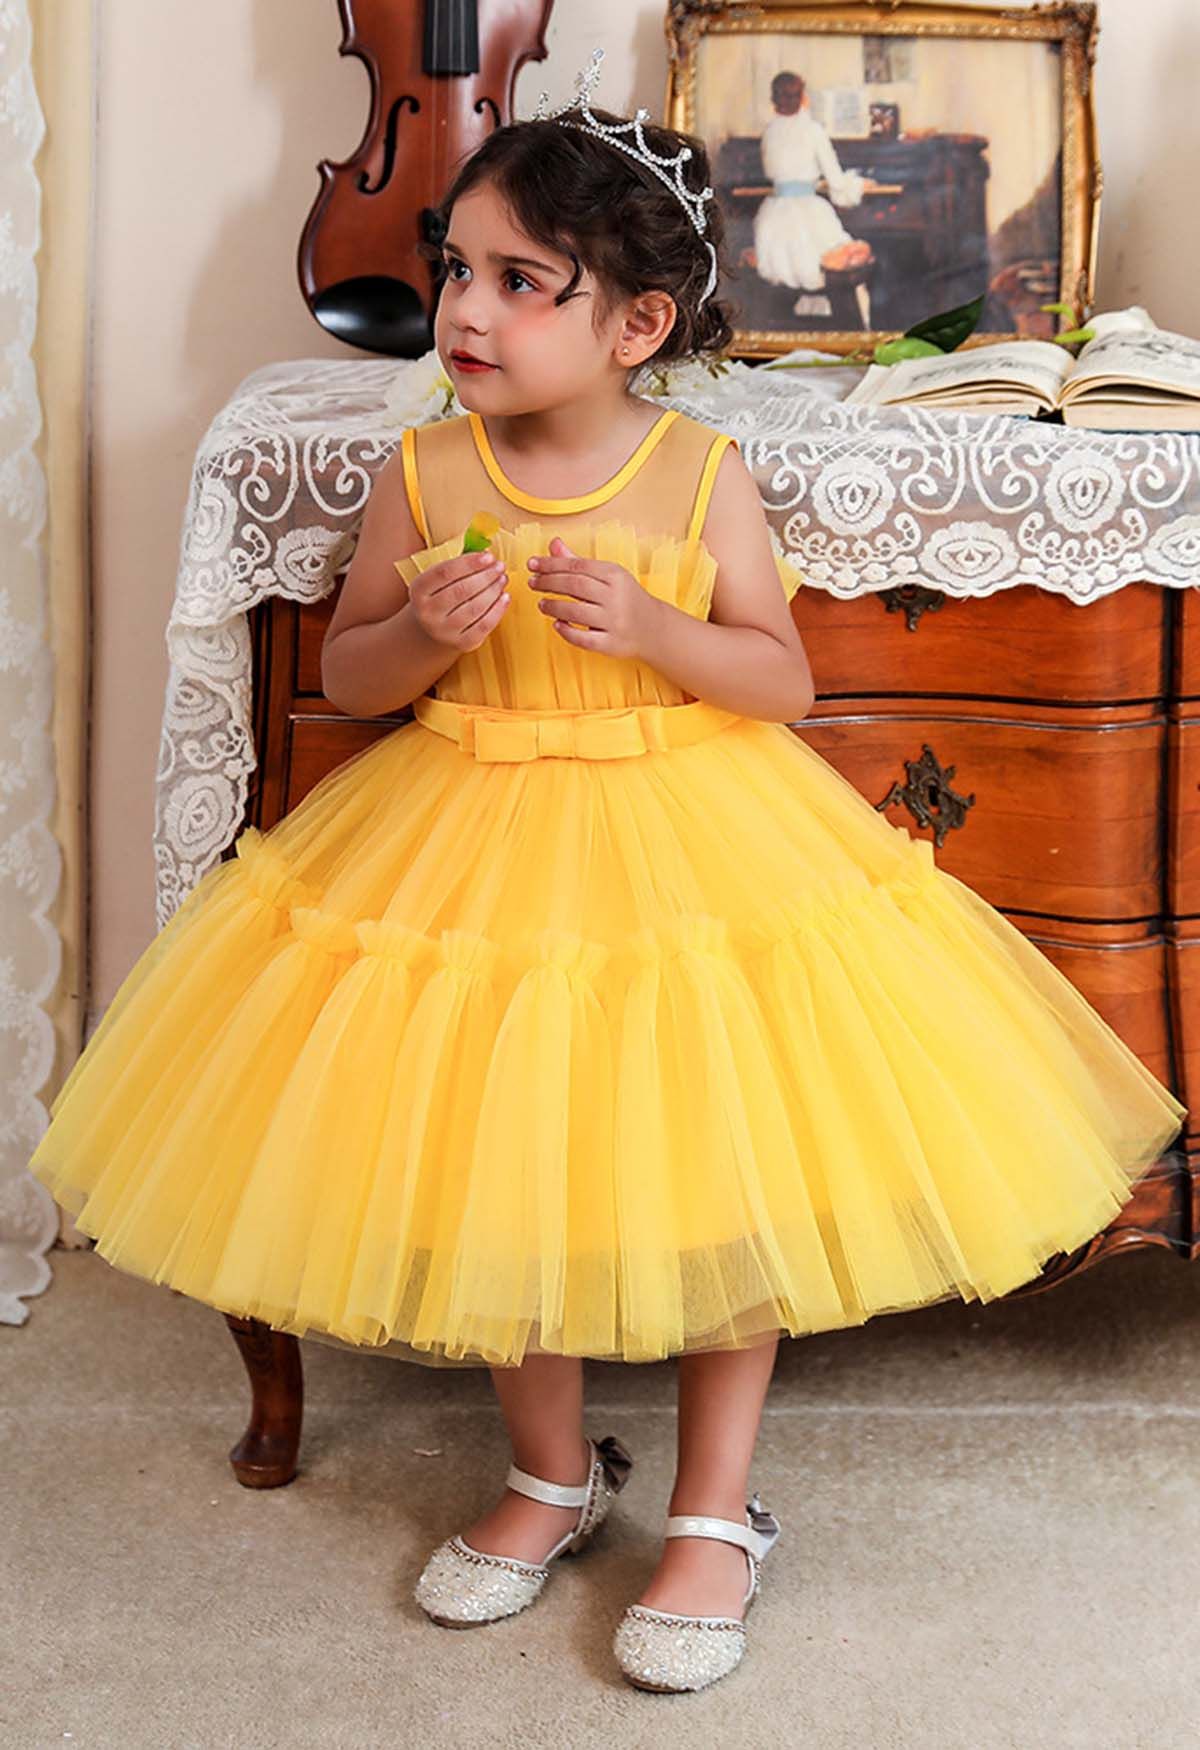 Bowknot Waist Tulle Dress in Yellow for Kids